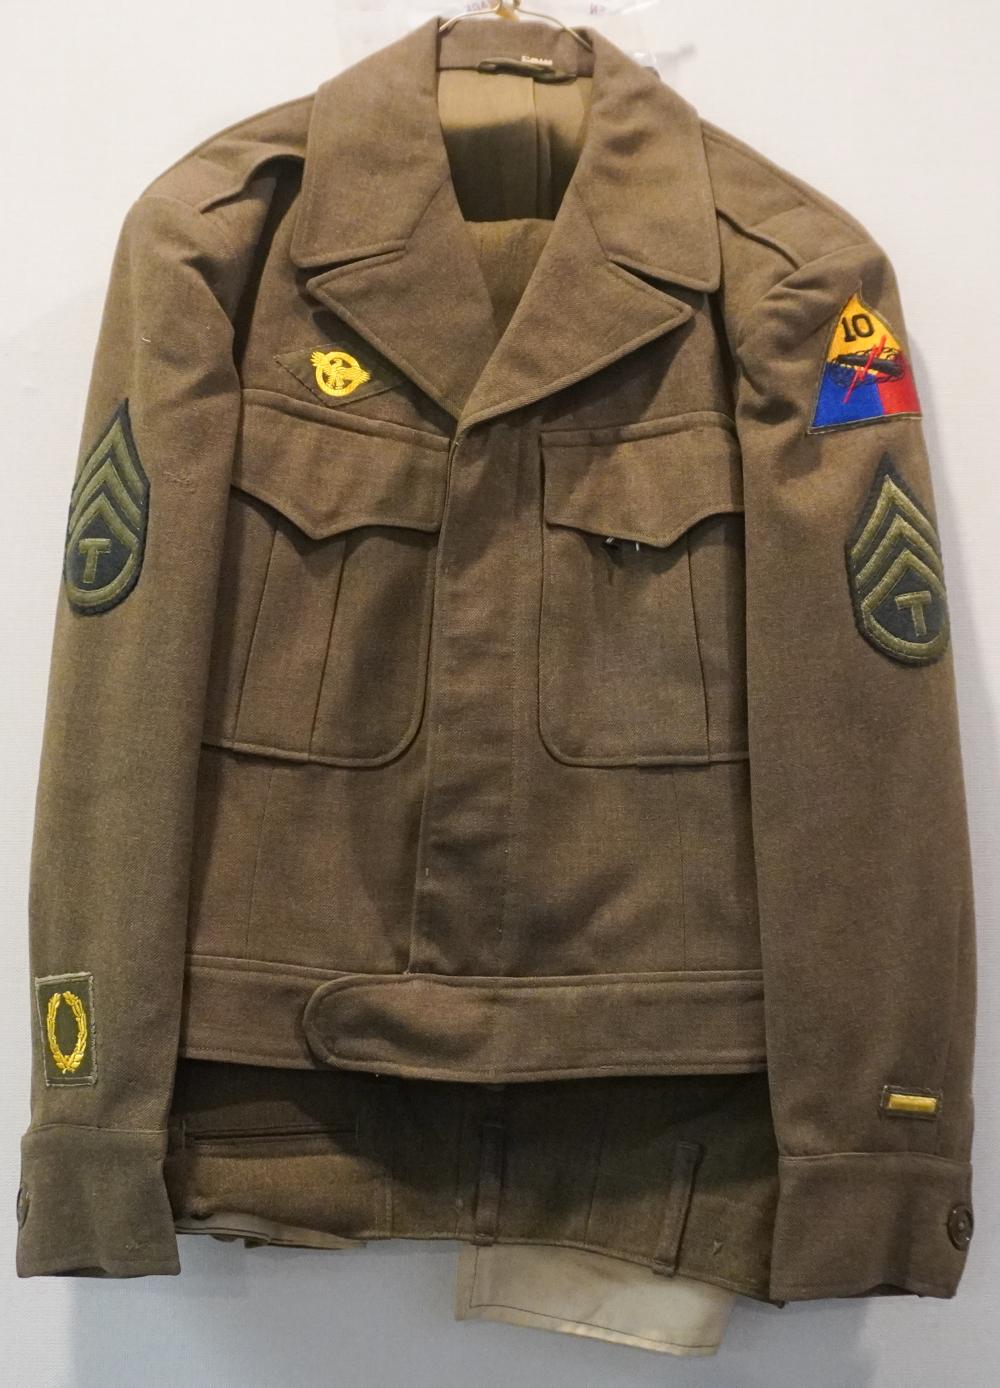 US ARMY WWII ISSUED UNIFORM, PANTS,